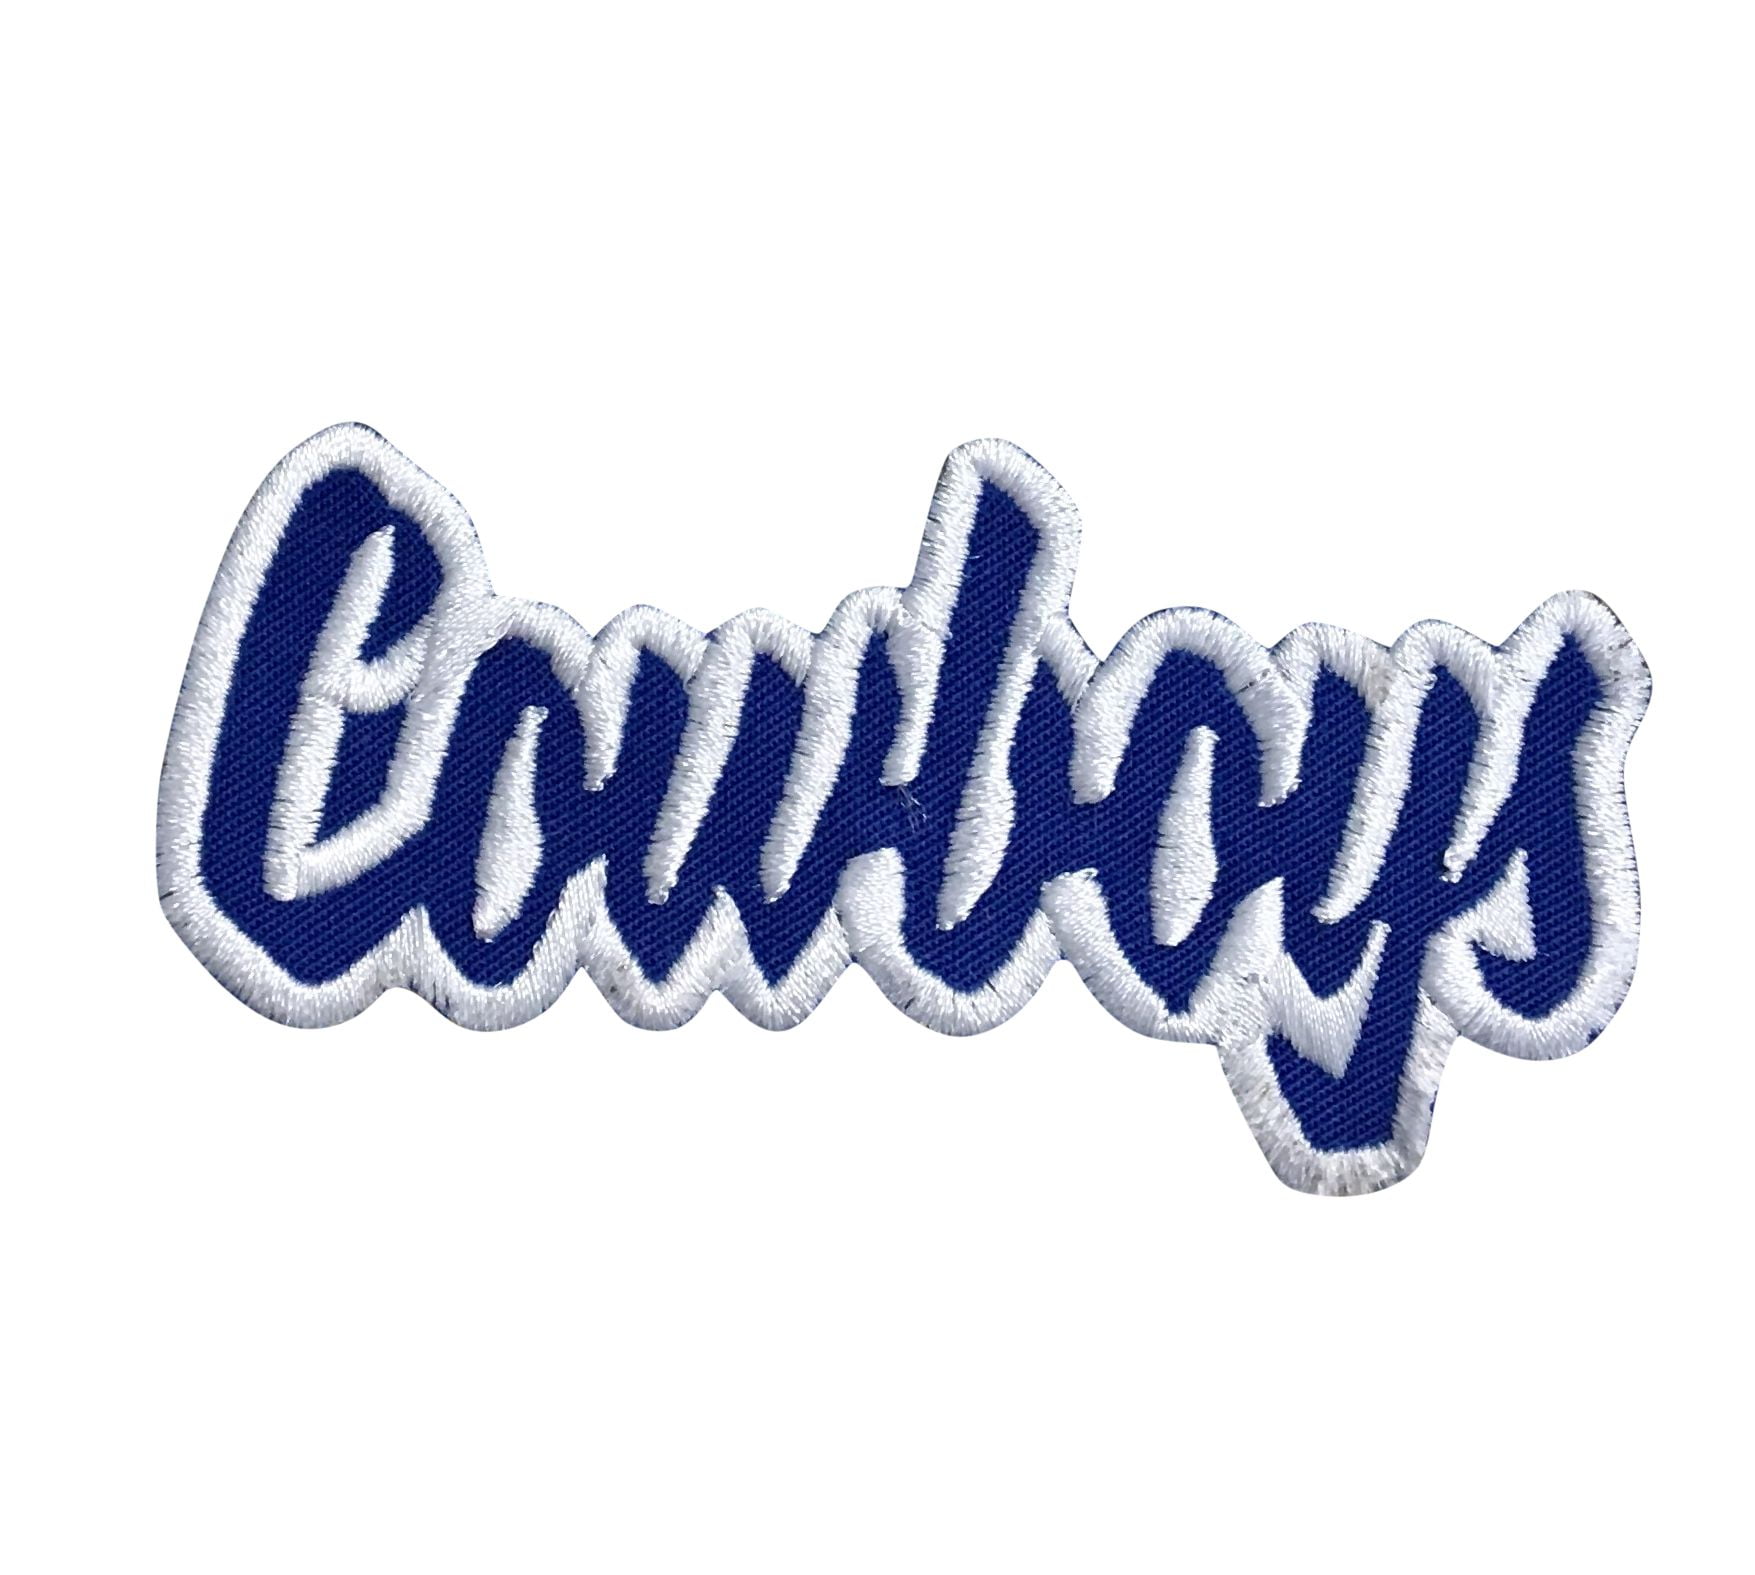 Cowboys - Royal Blue/White - Team Mascot - Words/Names - Iron on Applique/Embroidered  Patch 